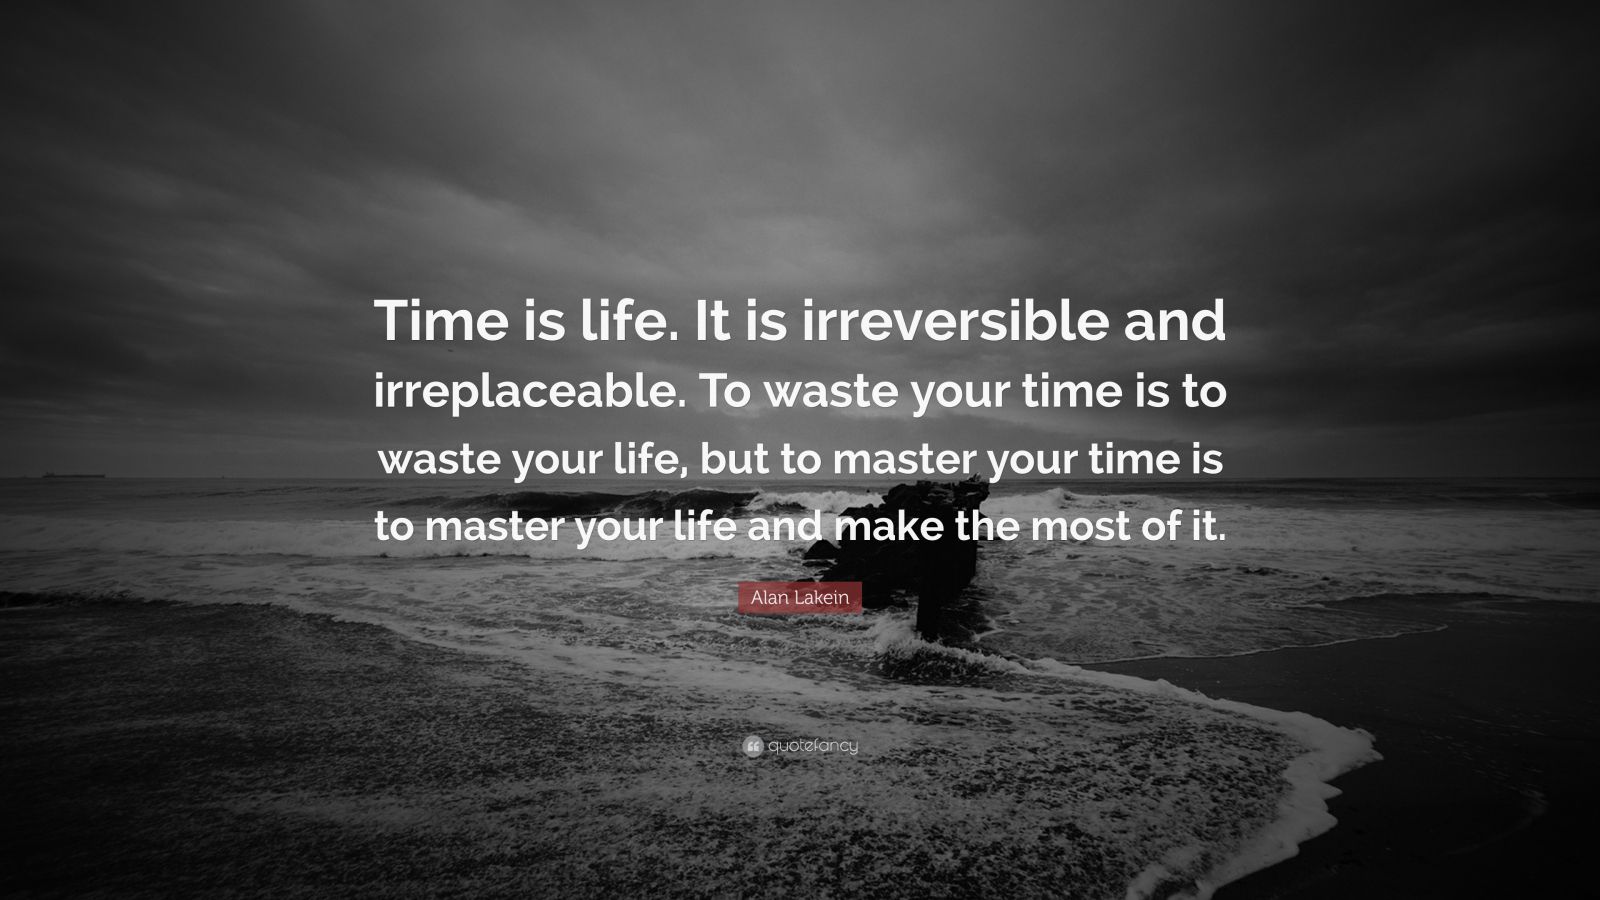 Alan Lakein Quote: “Time is life. It is irreversible and irreplaceable ...